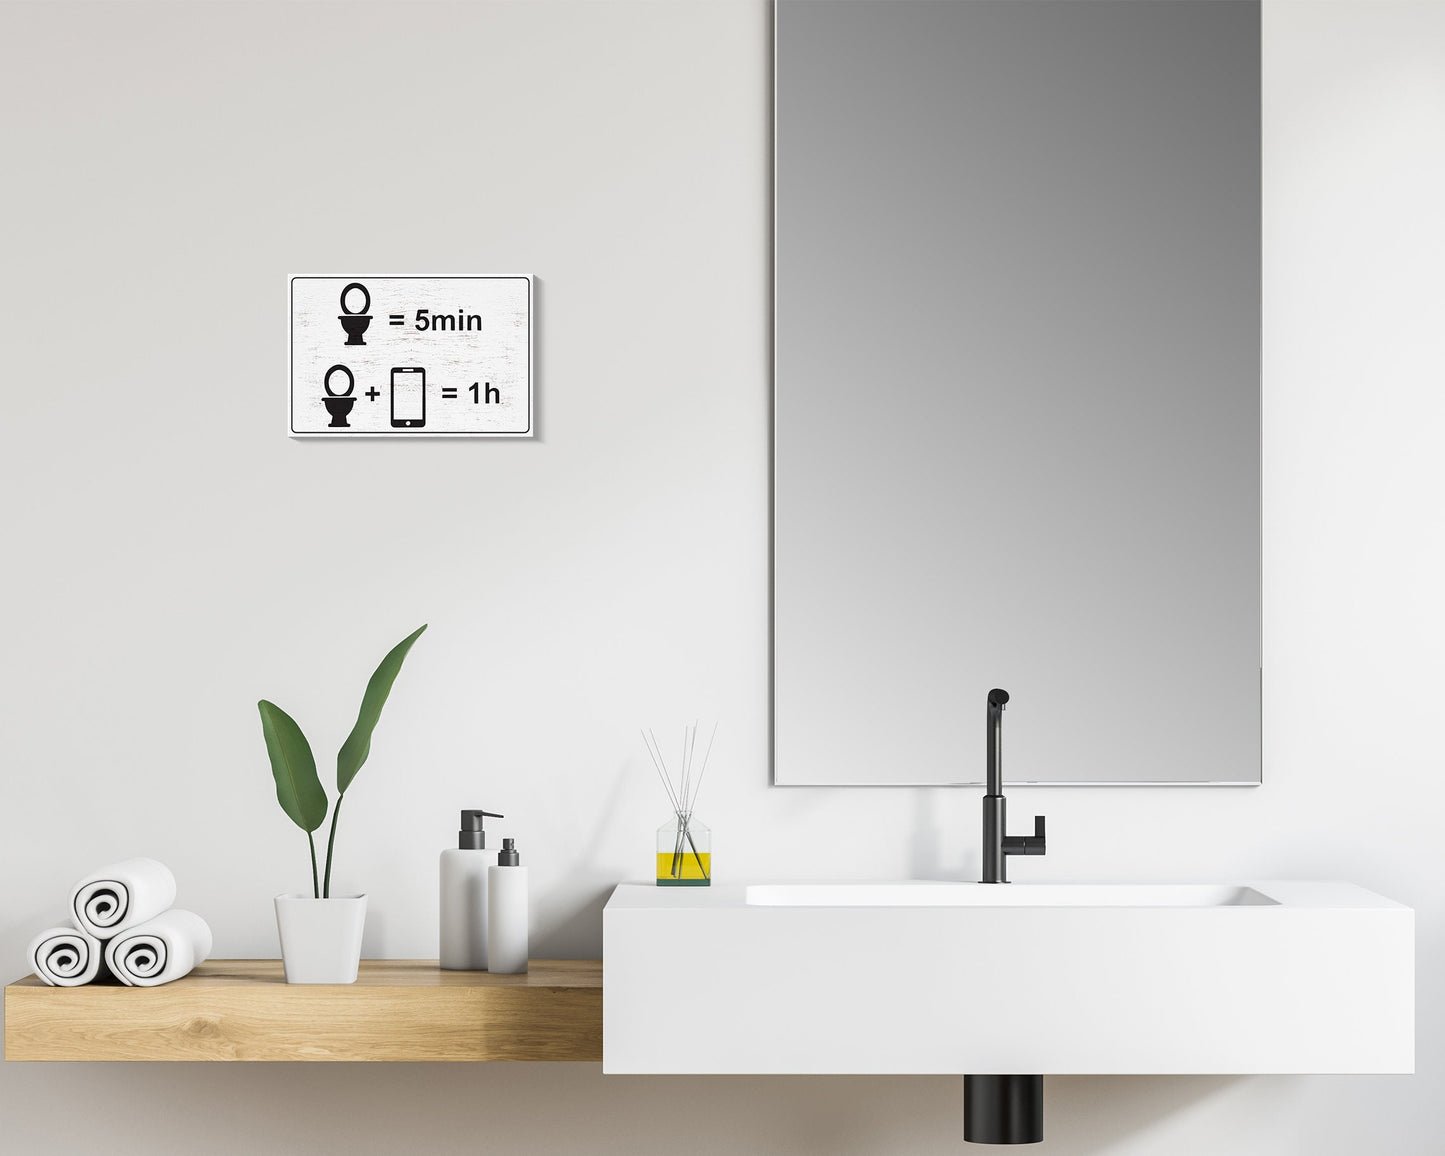 Add Laughter to Your Bathroom: 7.5in x 5in Wooden Wall Decor Sign - "Toilet = 5 min, Toilet + Phone = 1 Hour" - Humorous & Fun